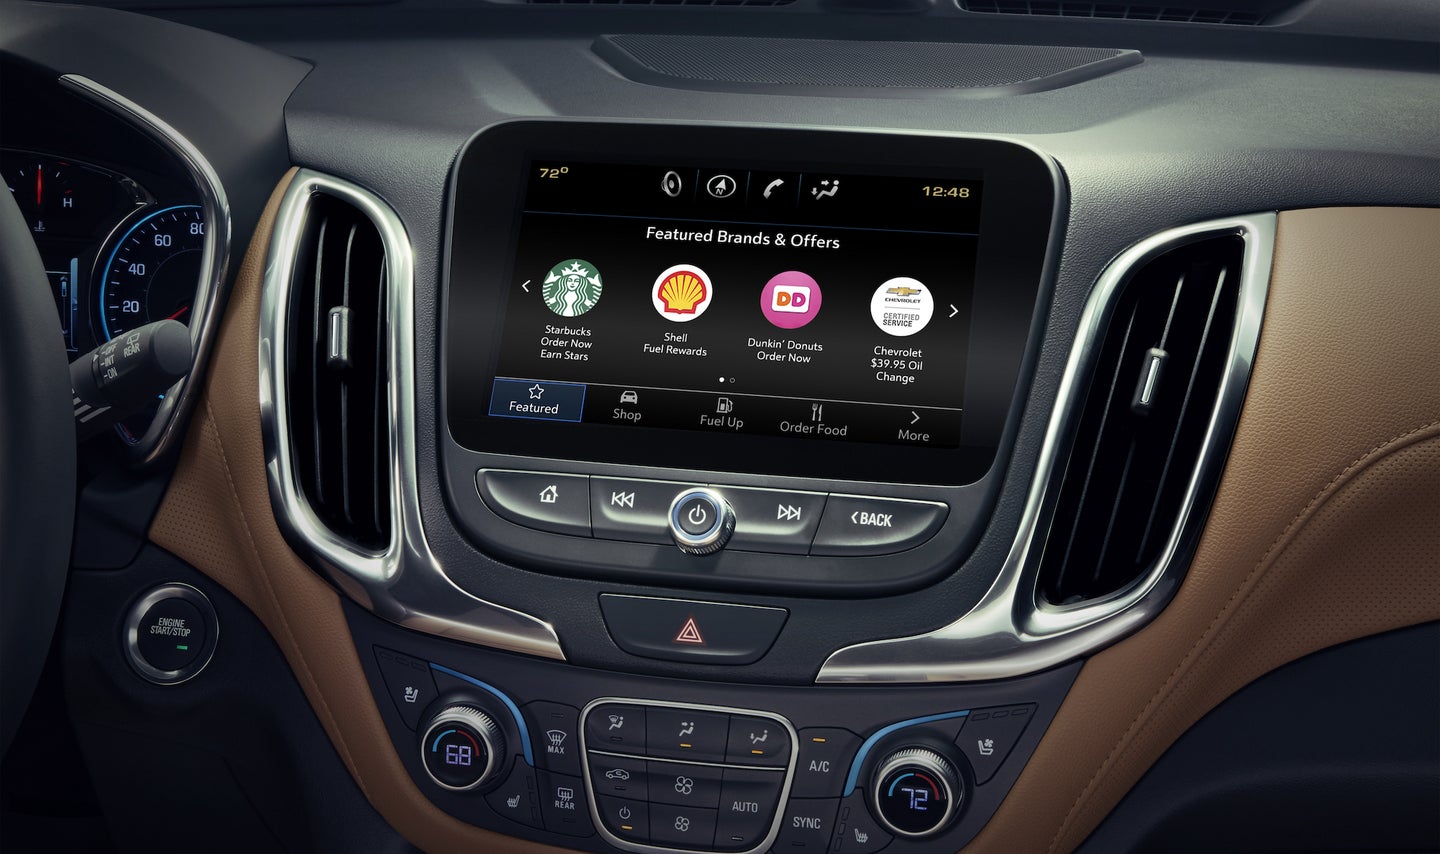 Ordering coffee from your car's infotainment screen is of questionable utility when you could just use your phone